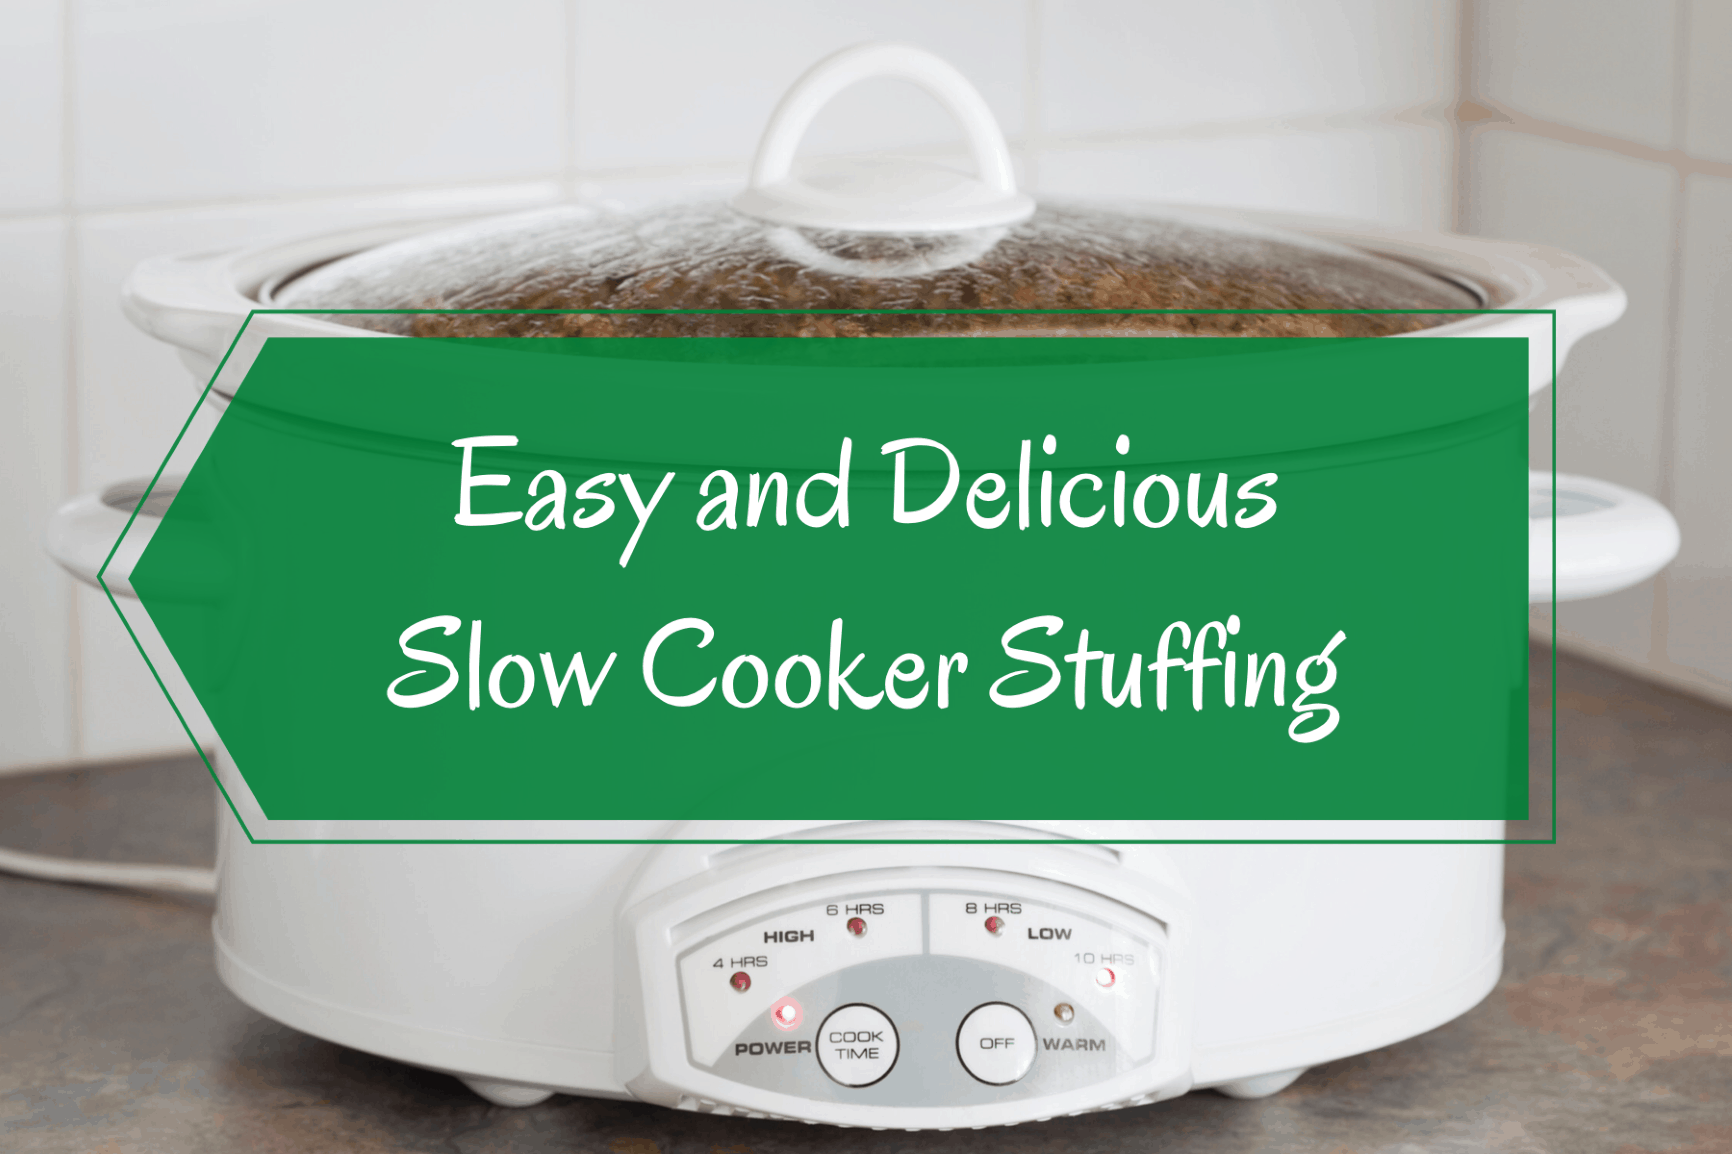 Easy and delicious slow cooker stuffing recipe - Boomer Eco Crusader